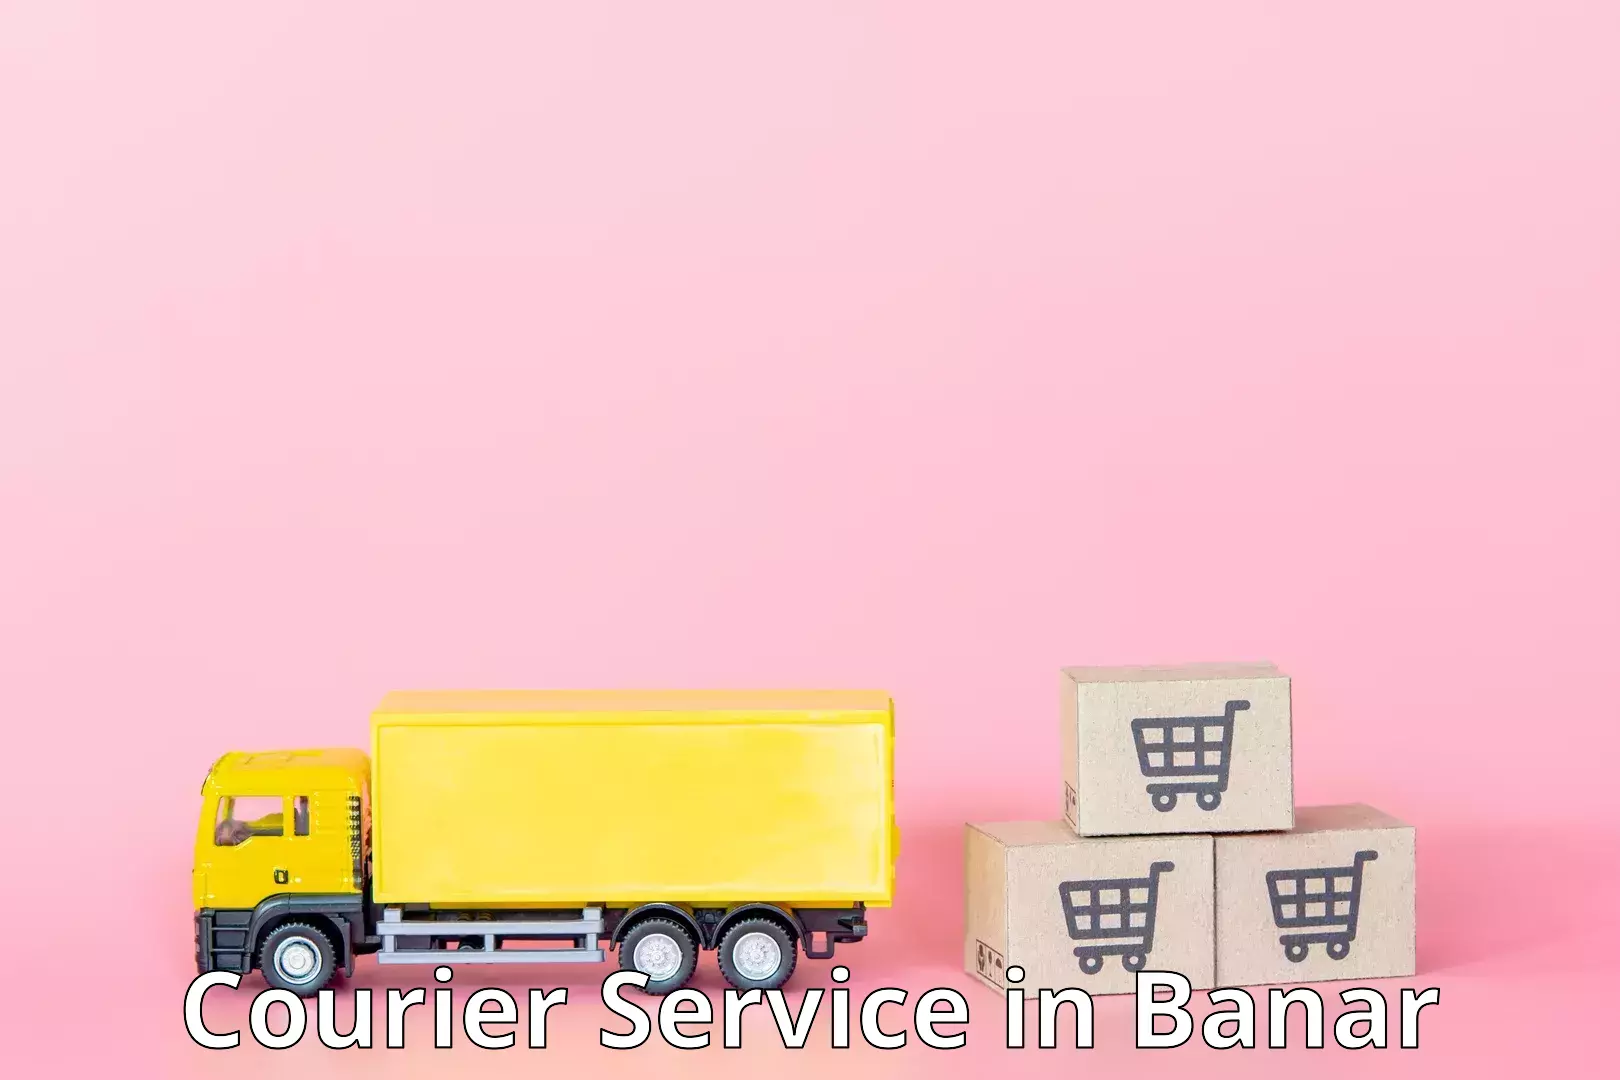 Automated parcel services in Banar